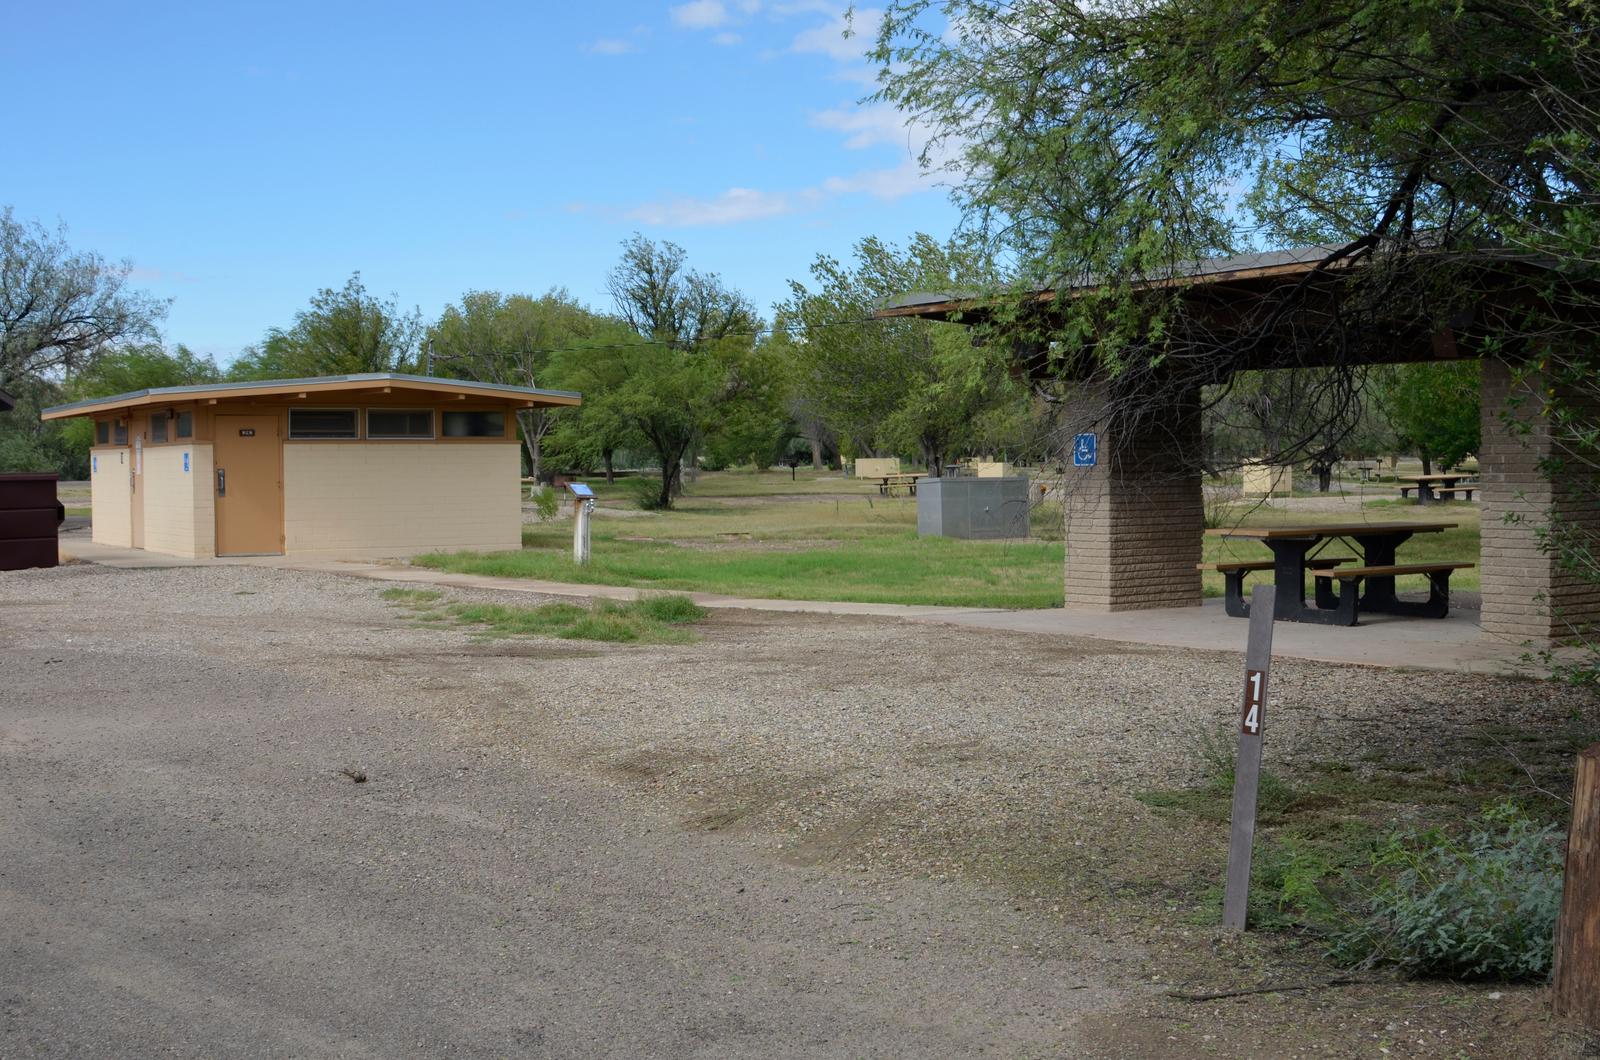 View of ADA accessible Site 14 from the main roadway. There is a wide gravel driveway for parking, a large shade shelter over a picnic table, and a paved sidewalk leading to a restroom. Cottonwood trees and bear boxes from other camp sites can be seen scattered in a grassy field behind the restroom.View of ADA accessible Site 14 from the main roadway.